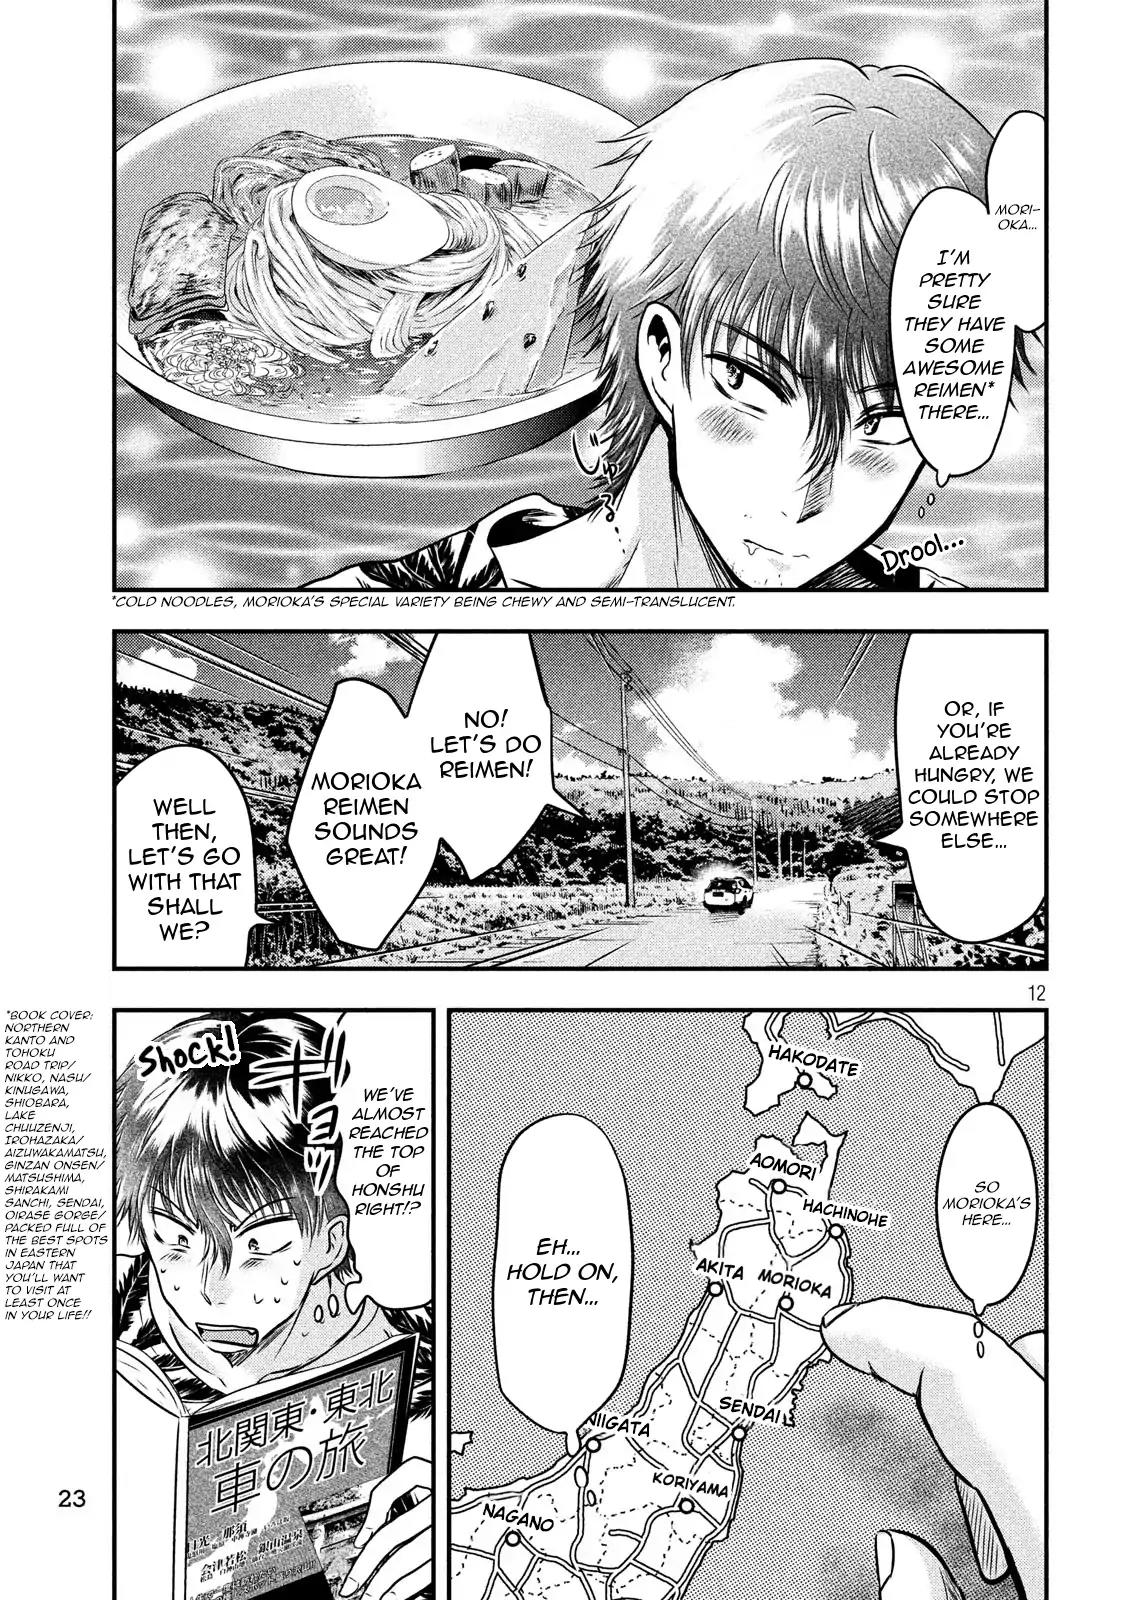 Eating Crab with a Yukionna Chapter 25: